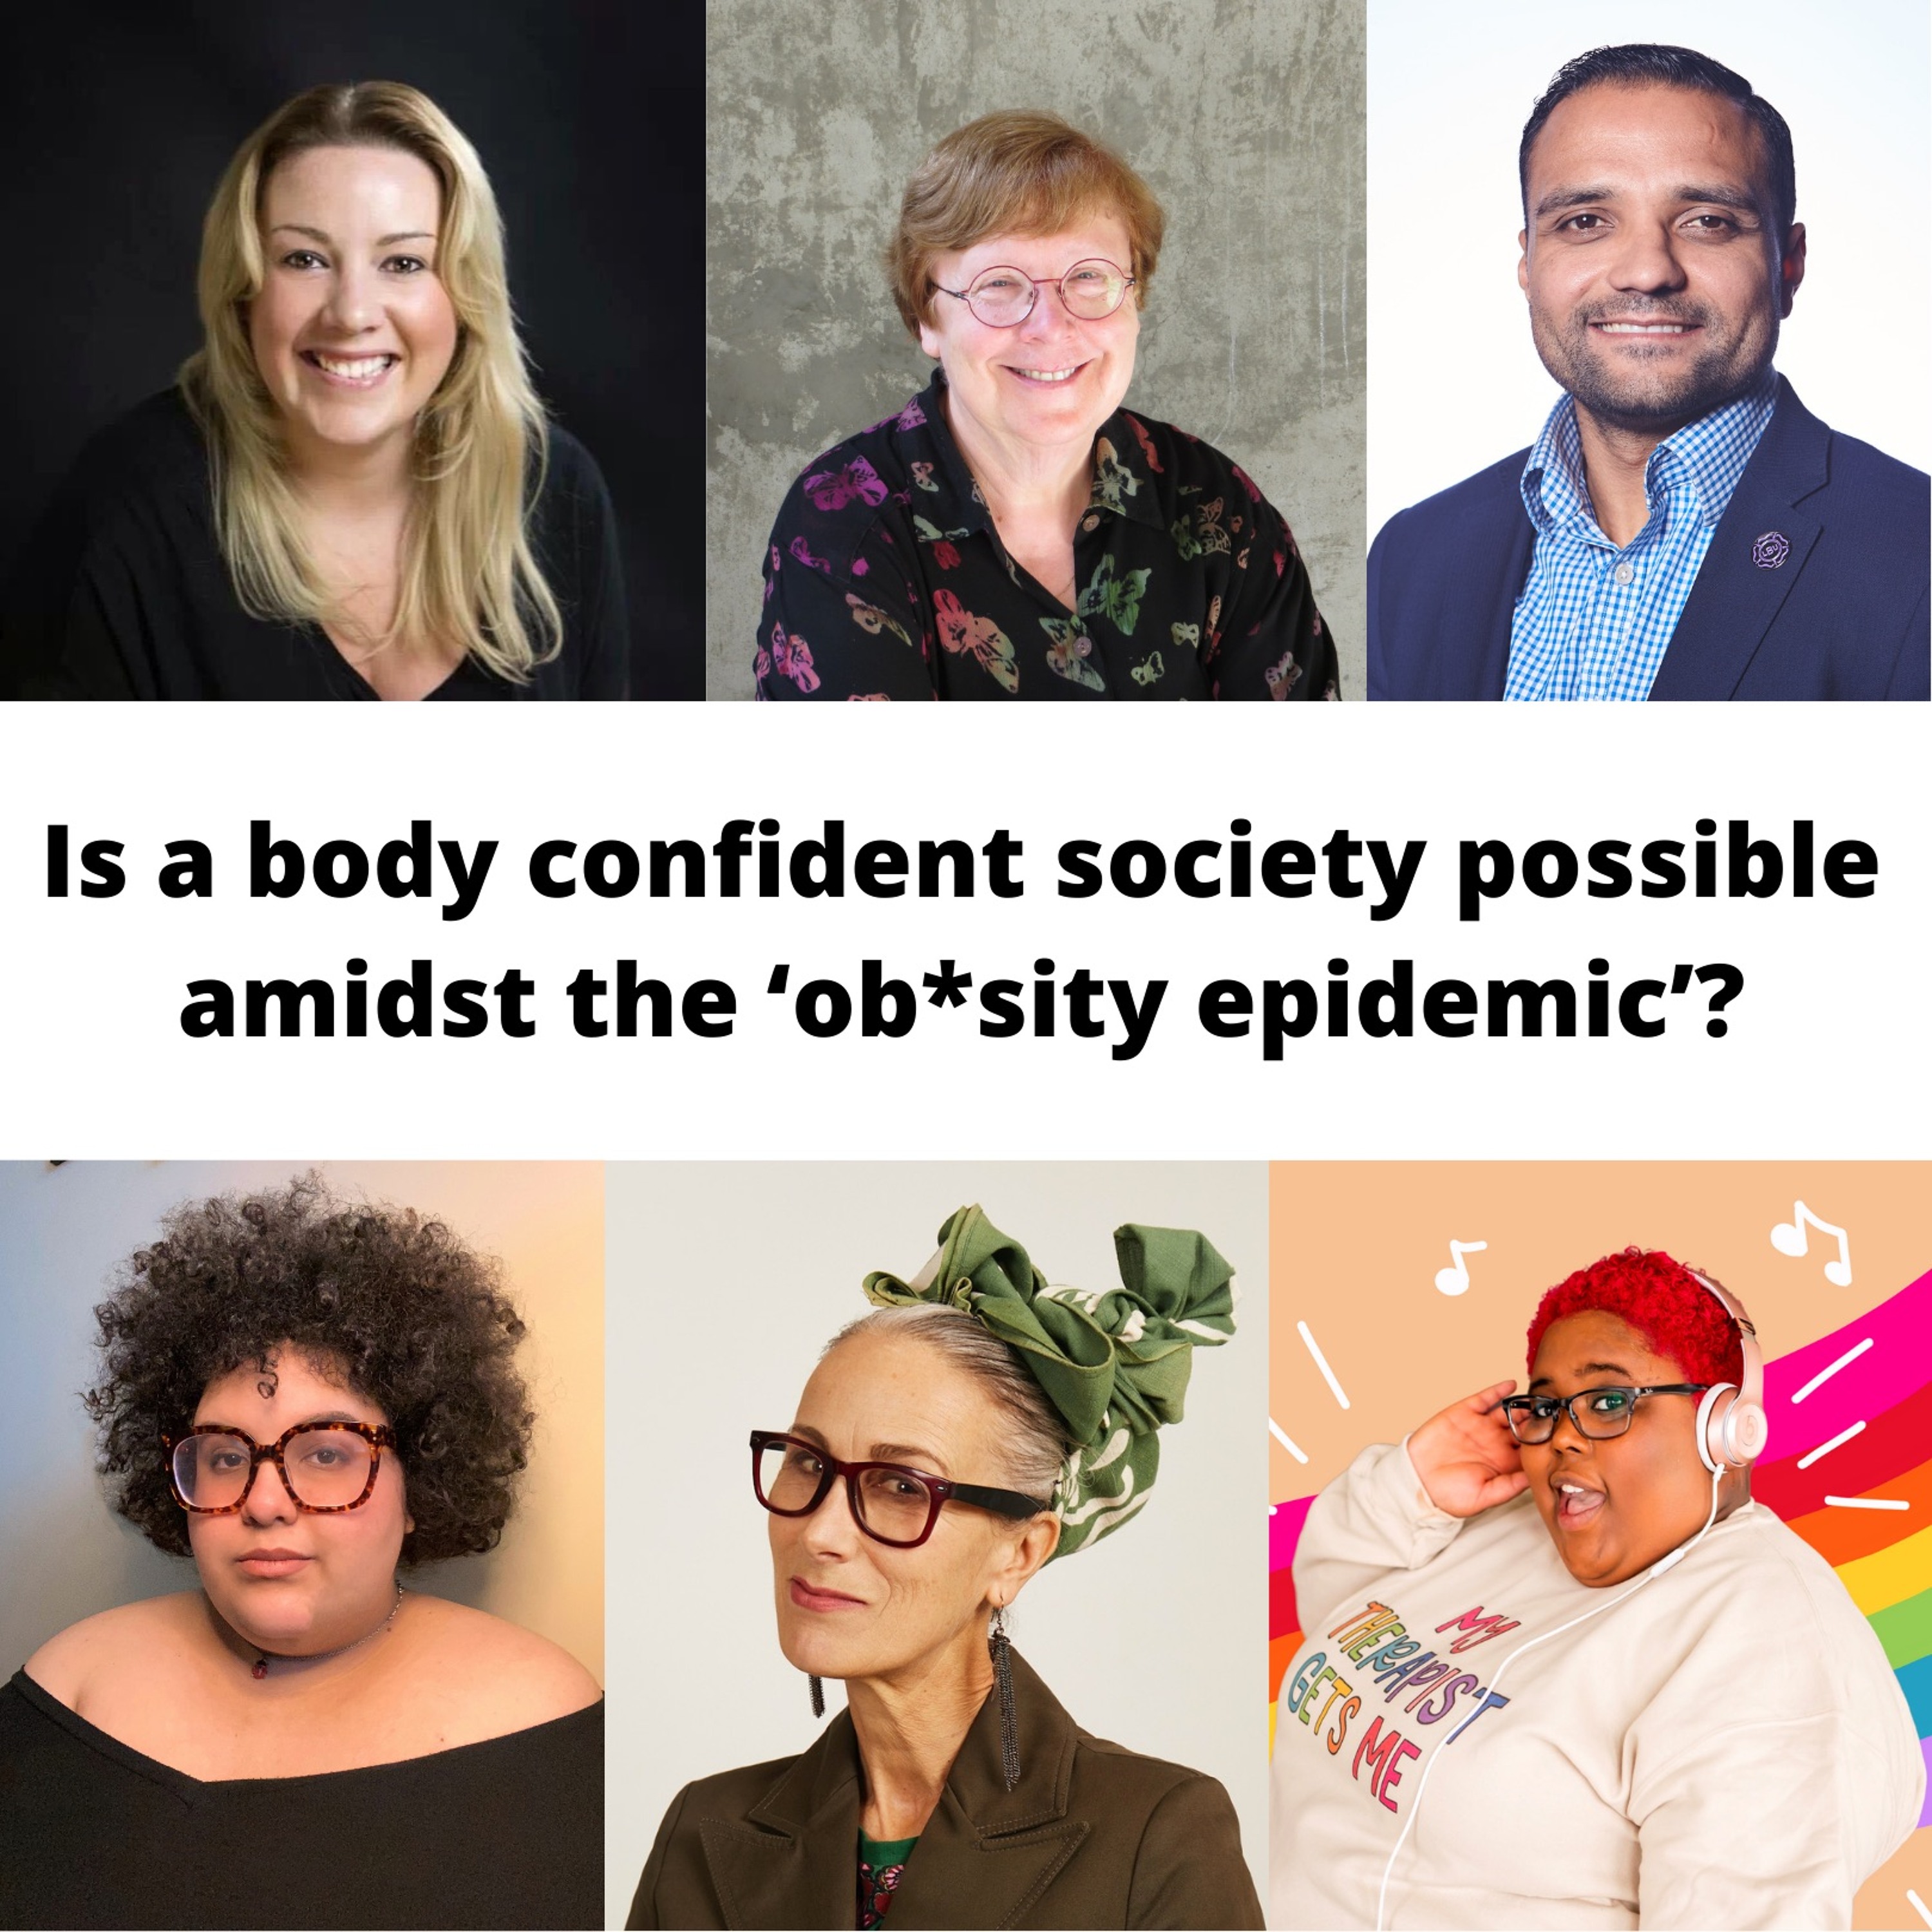 62: Is a Body Confident Society Possible Amidst the ‘Ob*sity Epidemic’?